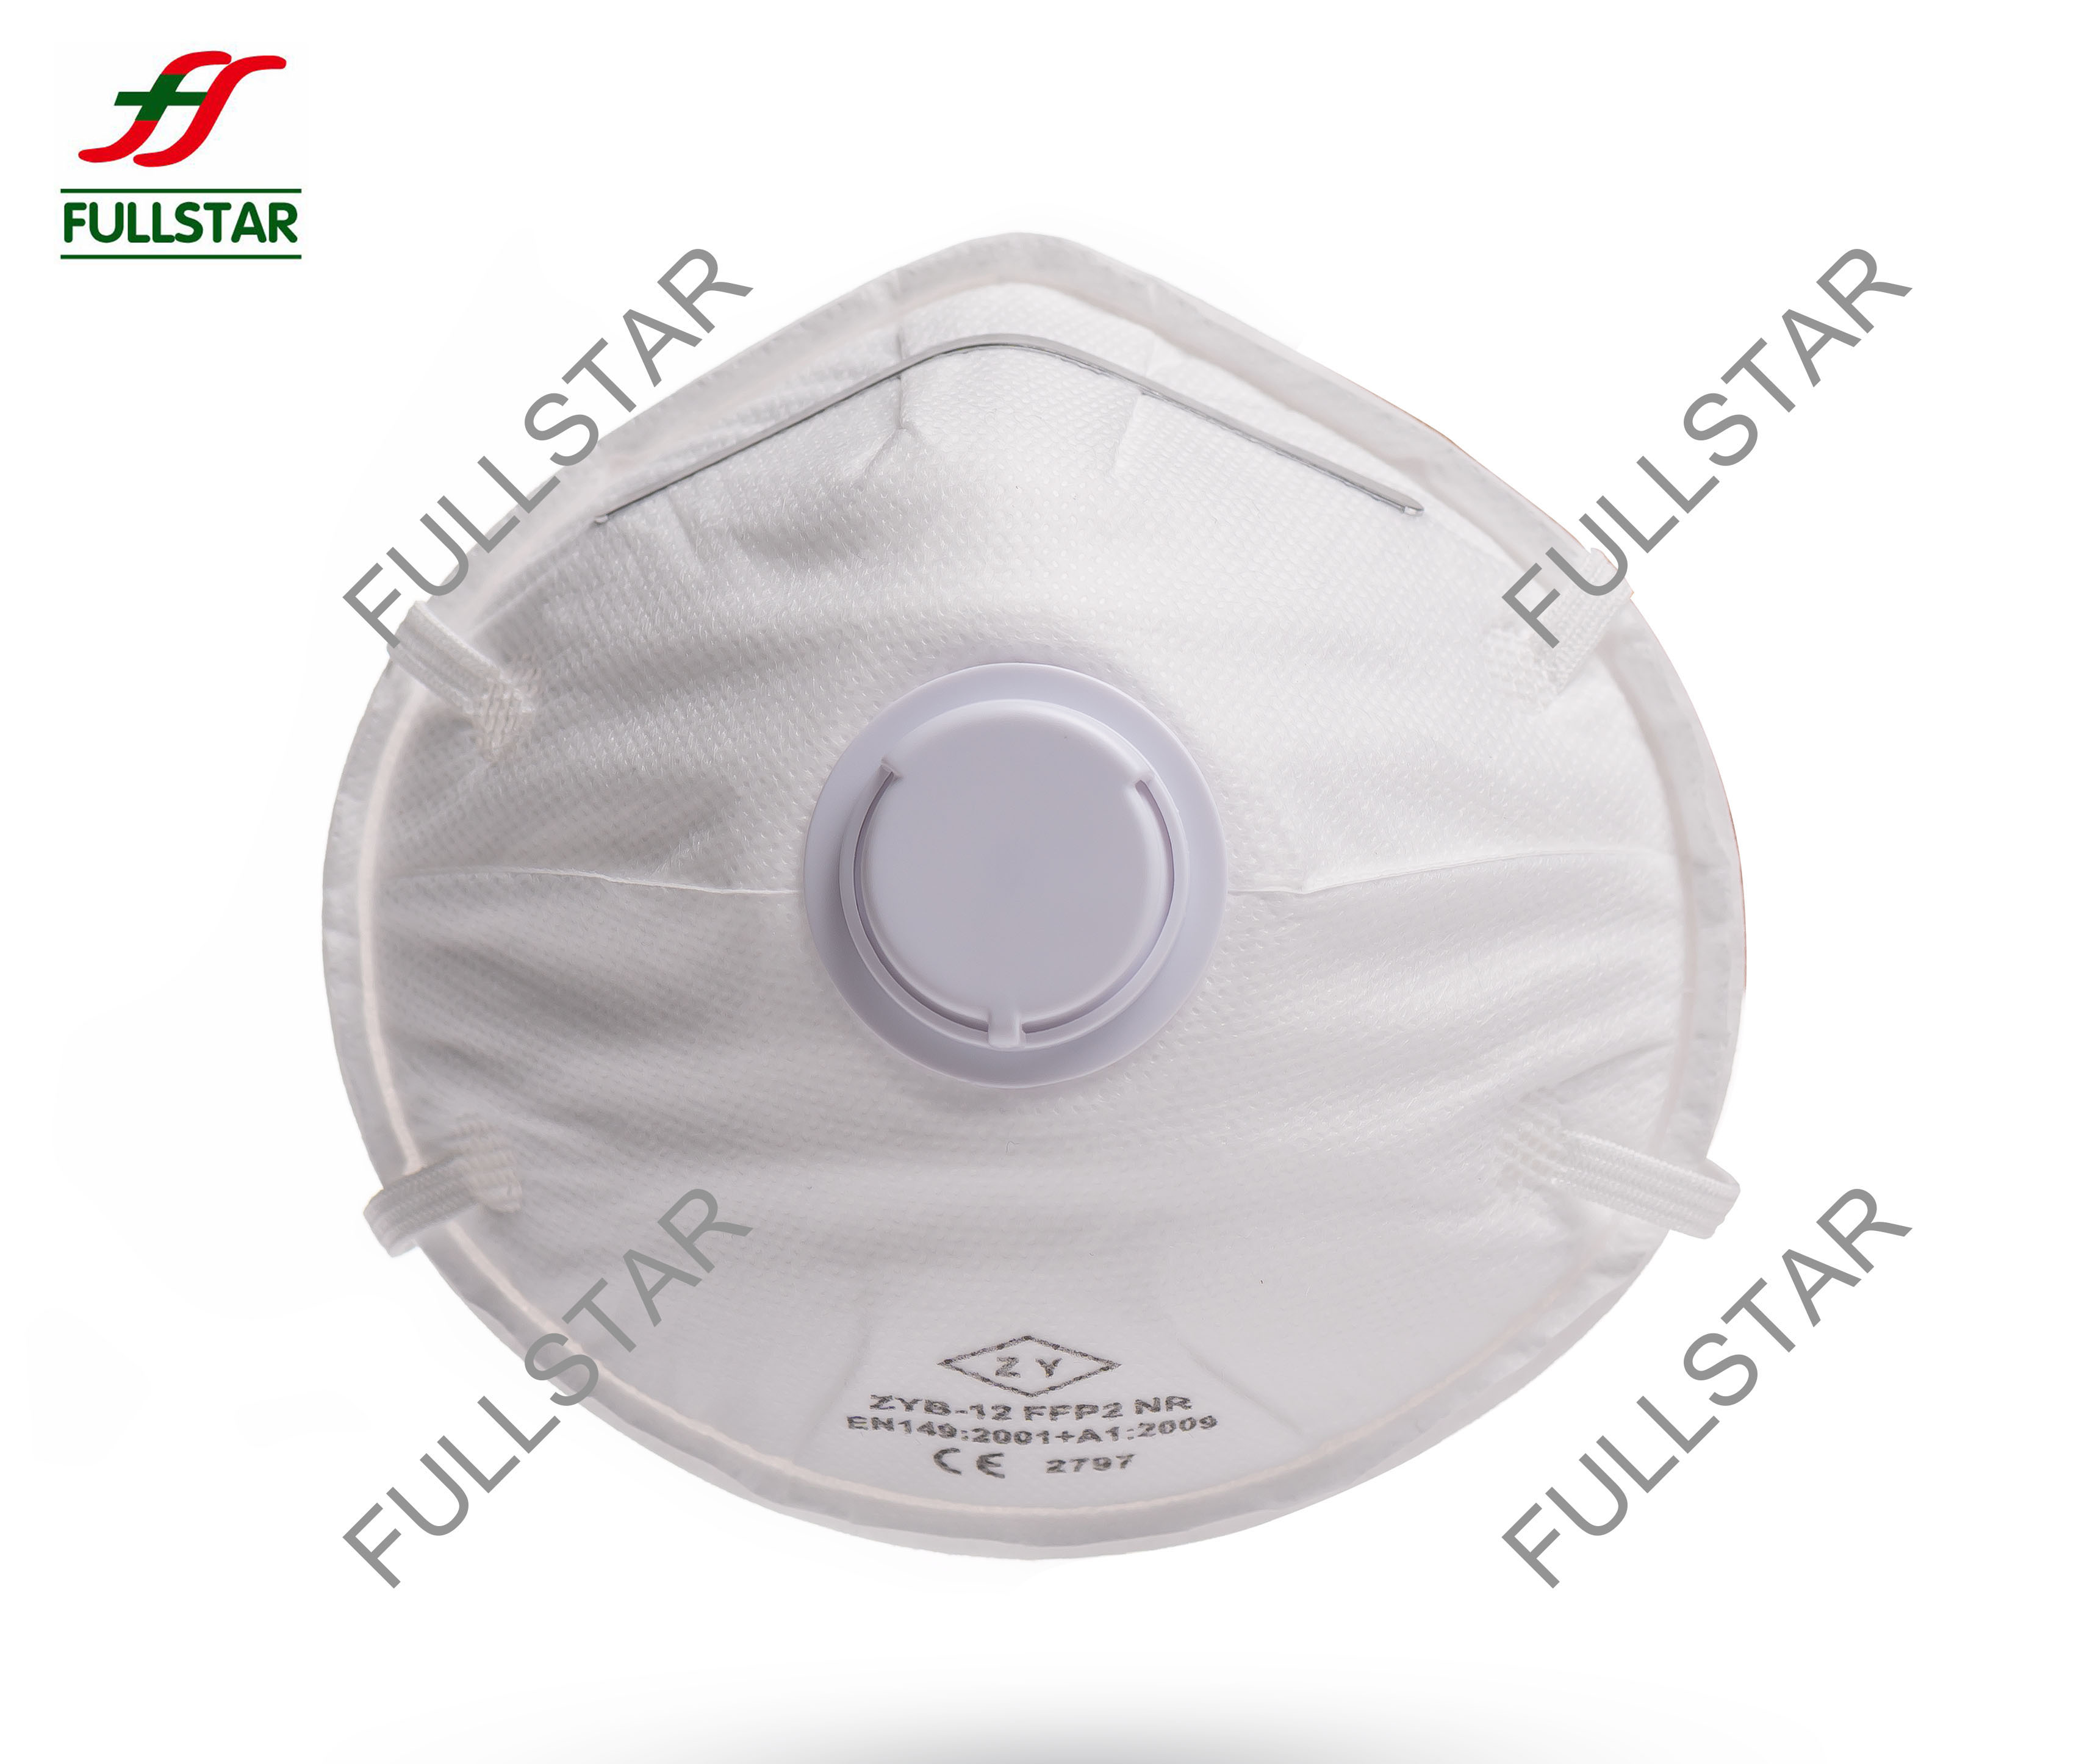 FFP2 cone style Face Mask with valve